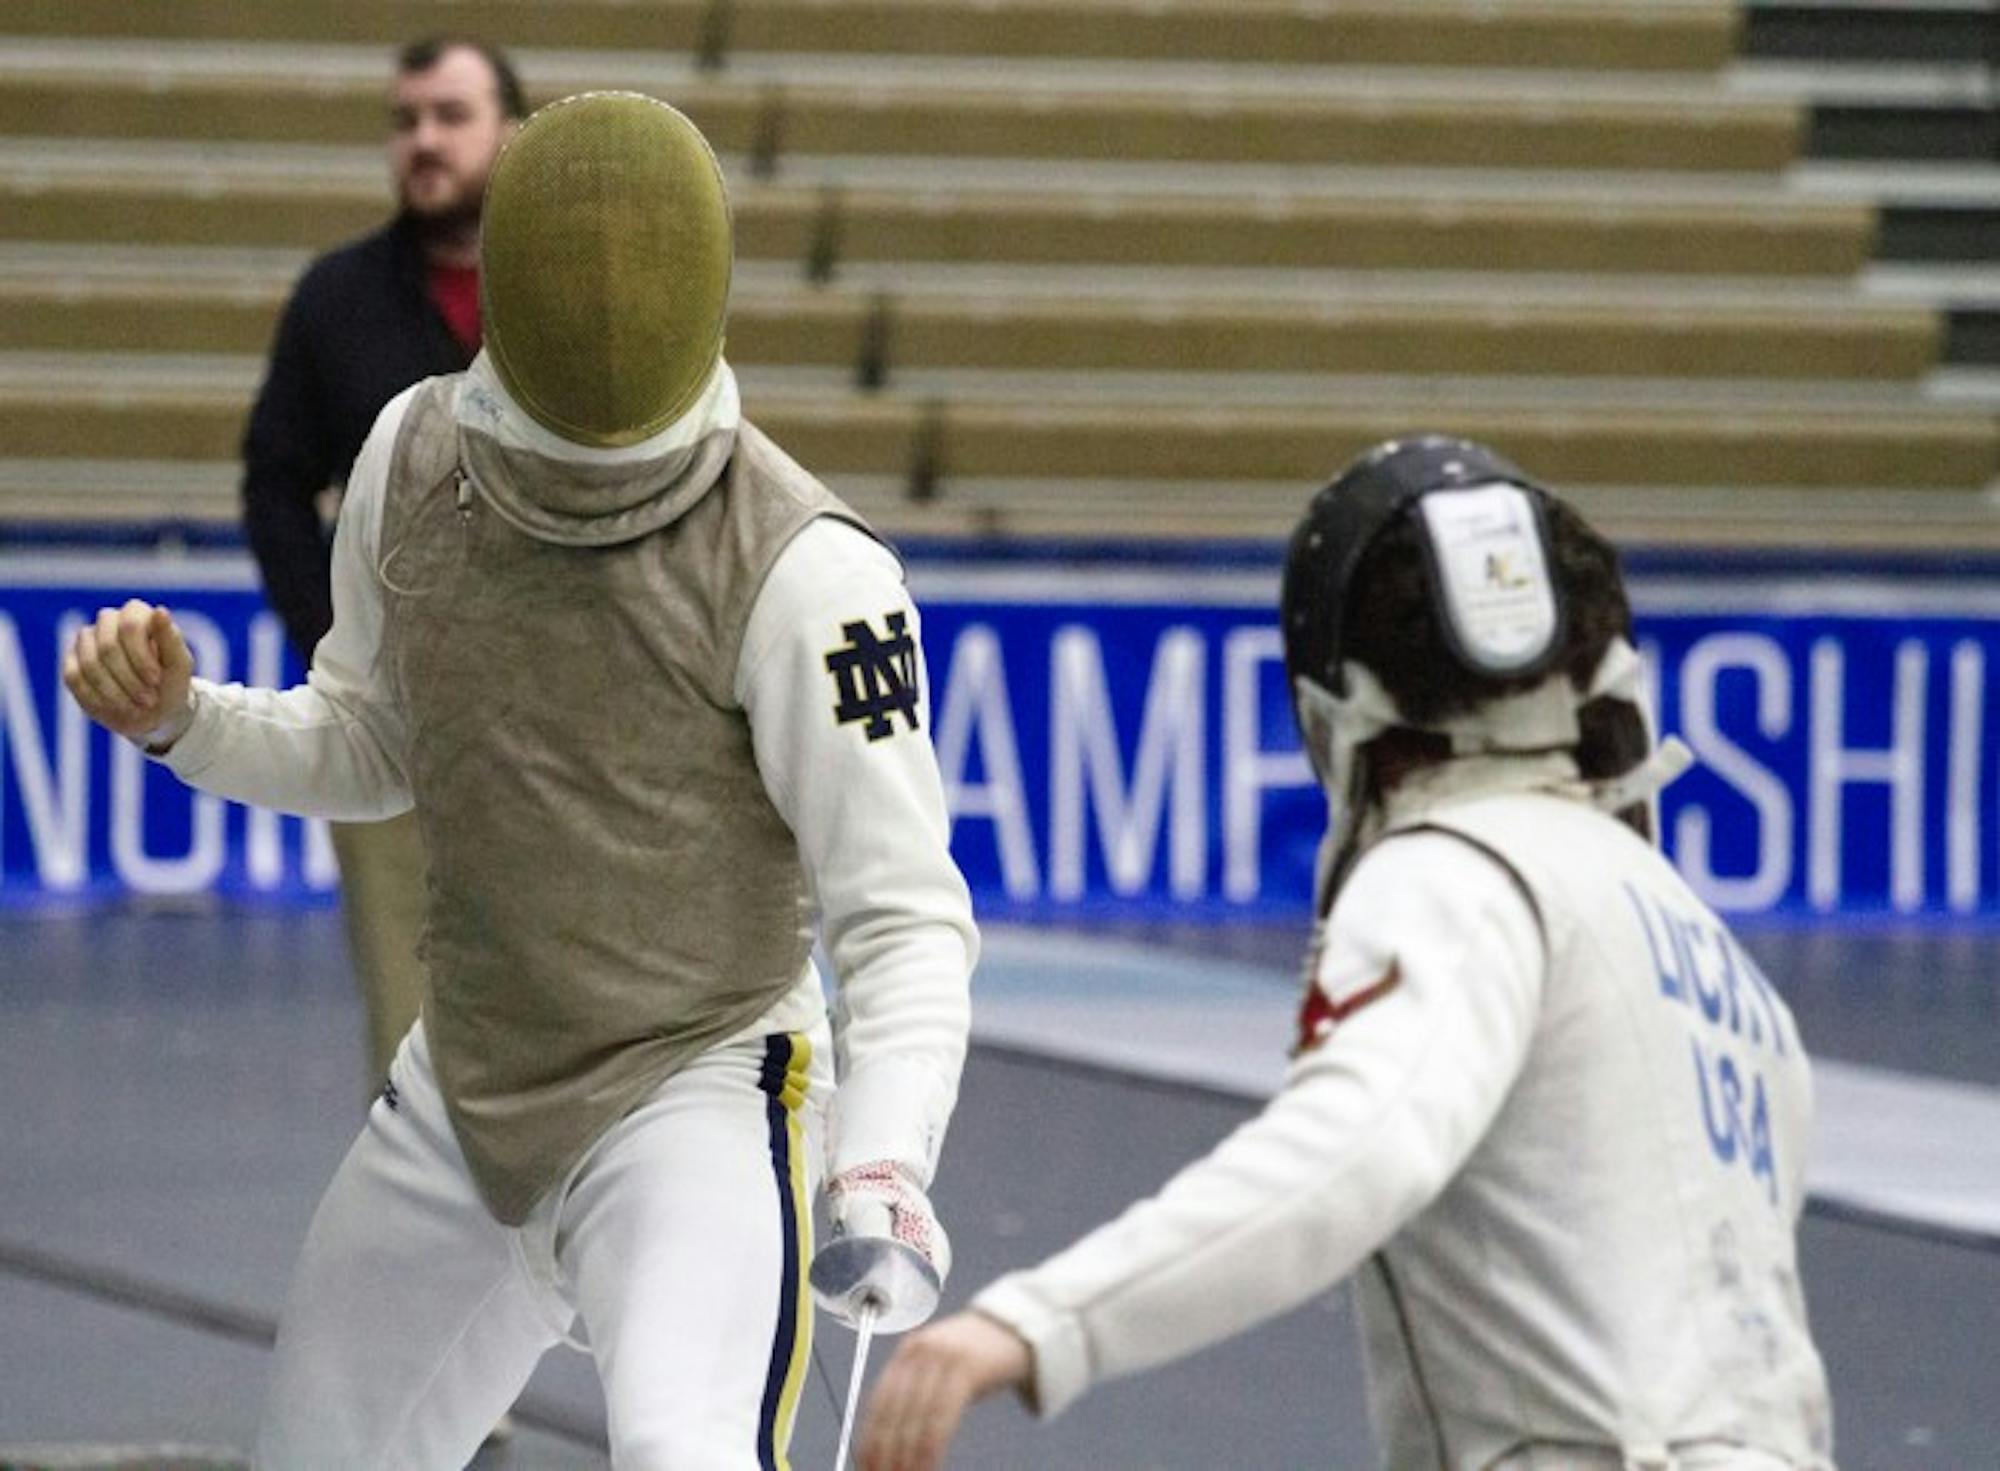 Irish freshman foilist Axel Kiefer competes at the ACC championships Feb. 28 at the Castellan Family Fencing Center. Kiefer finished in third place in the men's foil at the NCAA championships last weekend.